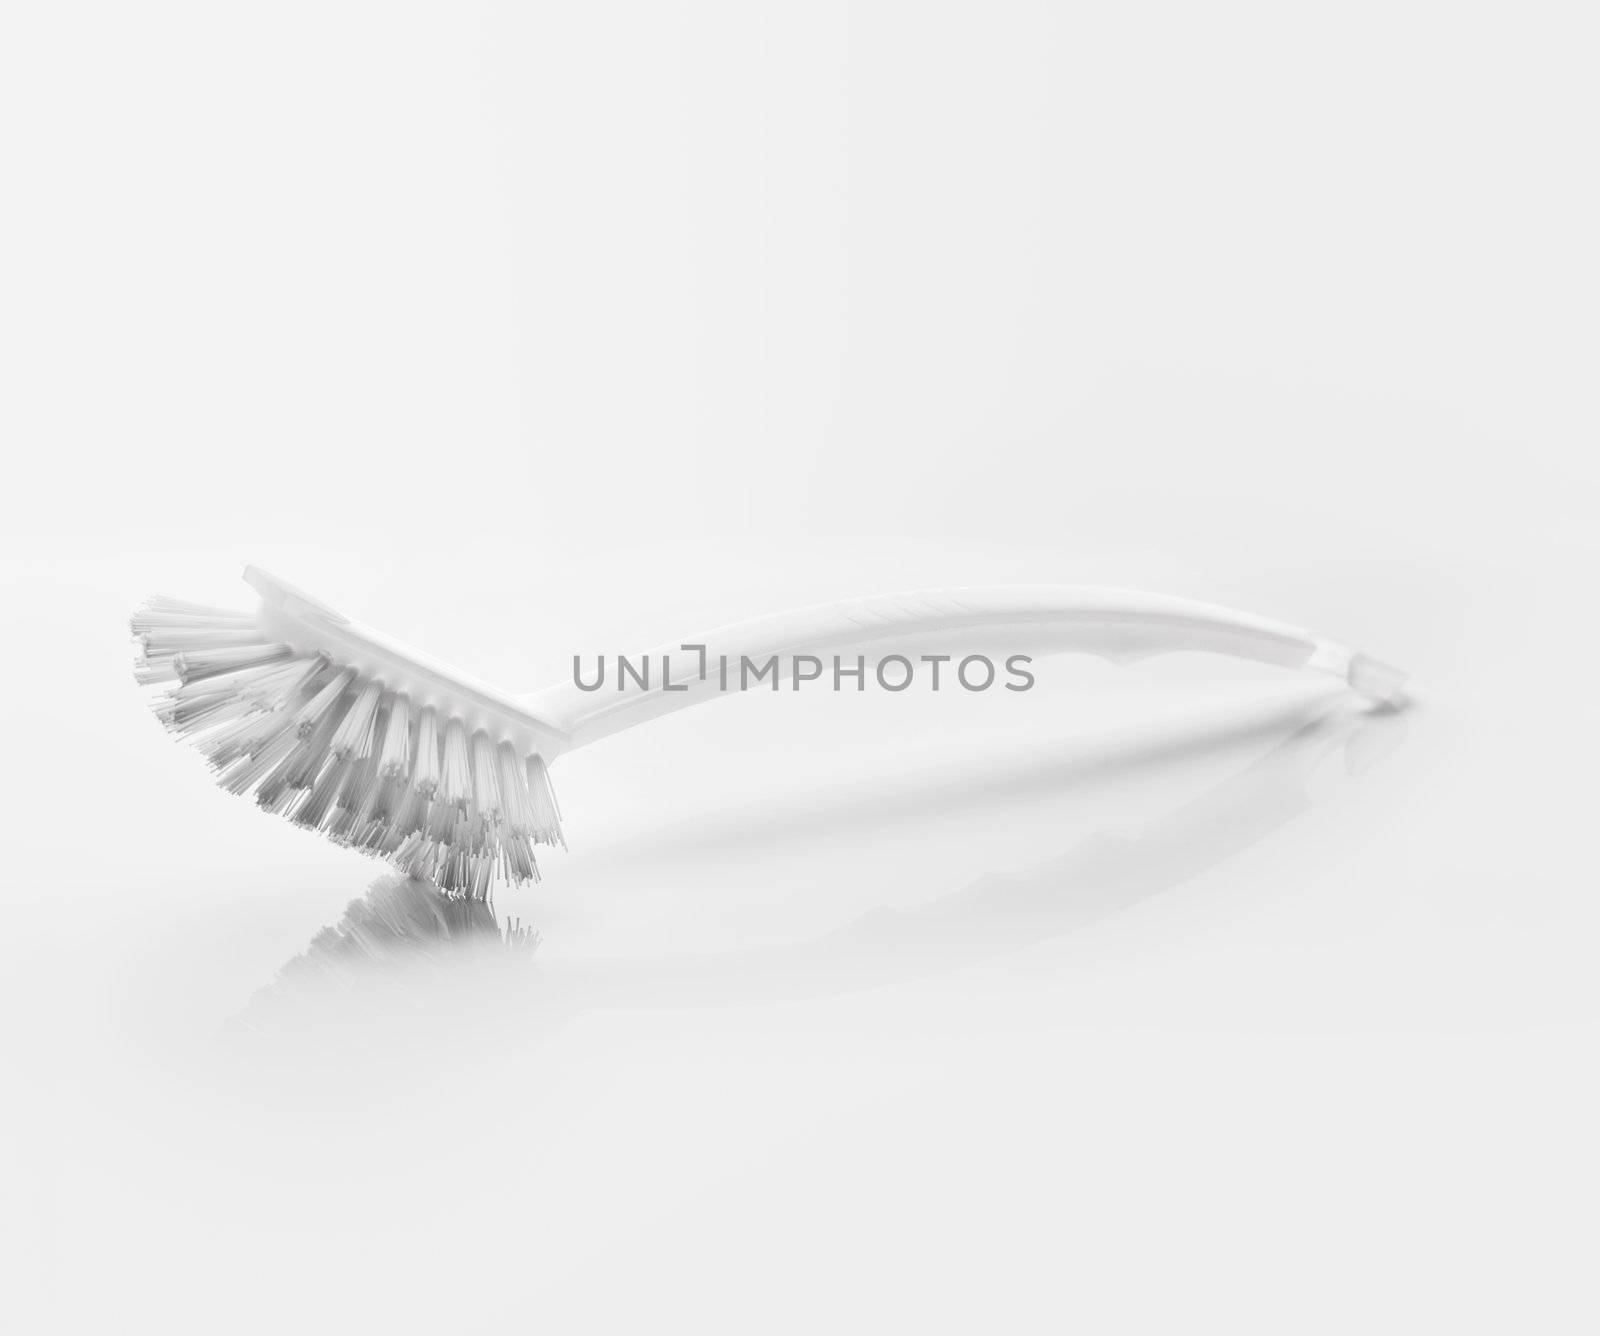 A White clean new dish brush on light grey reflective background.